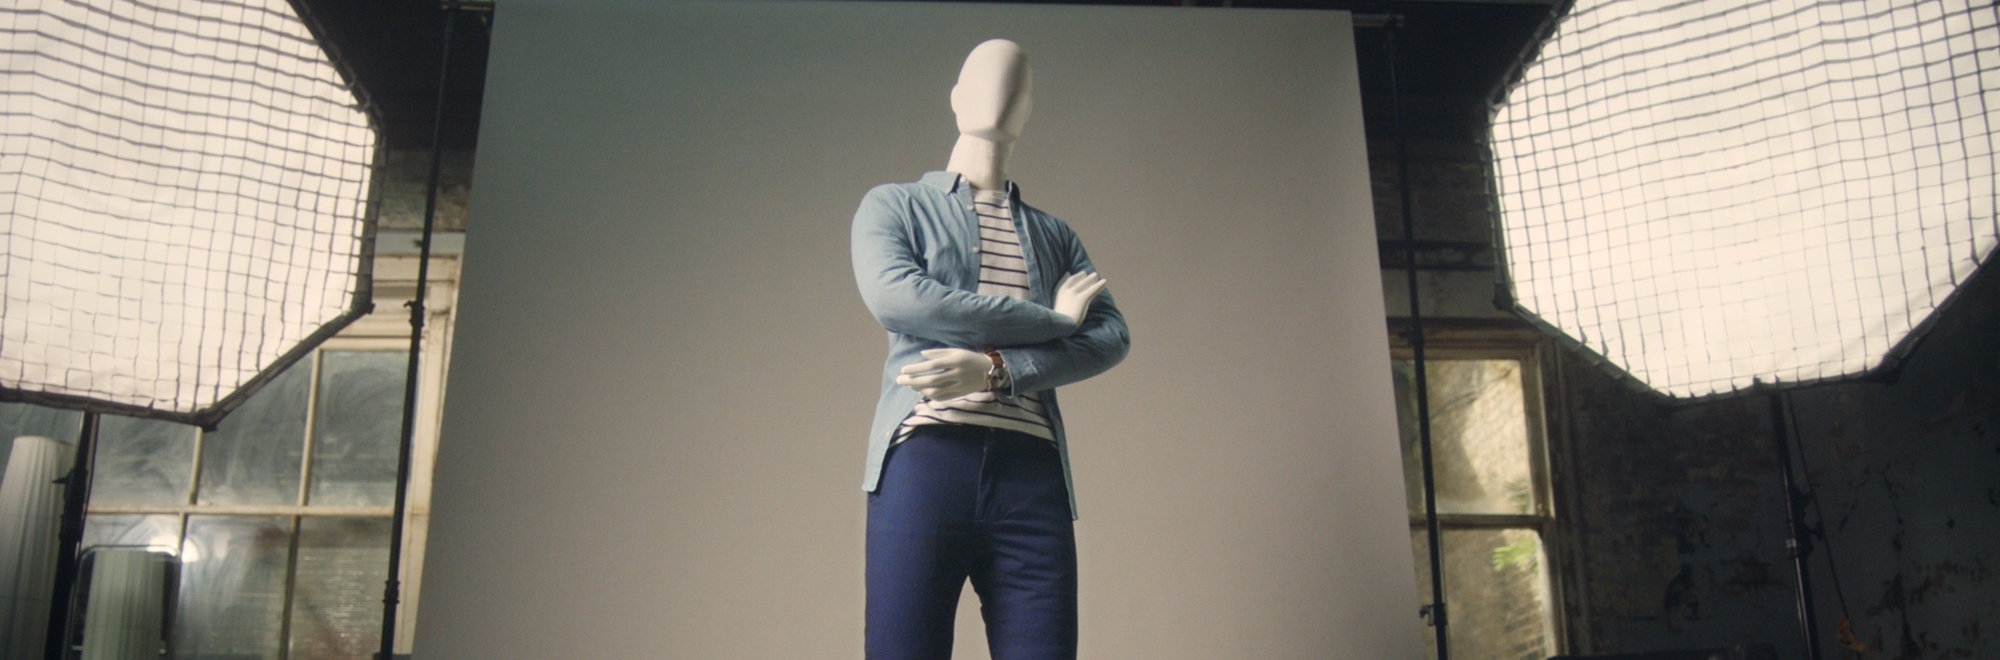 Spoke hires Jack ‘the not so standard’ mannequin to model its custom fit clothes